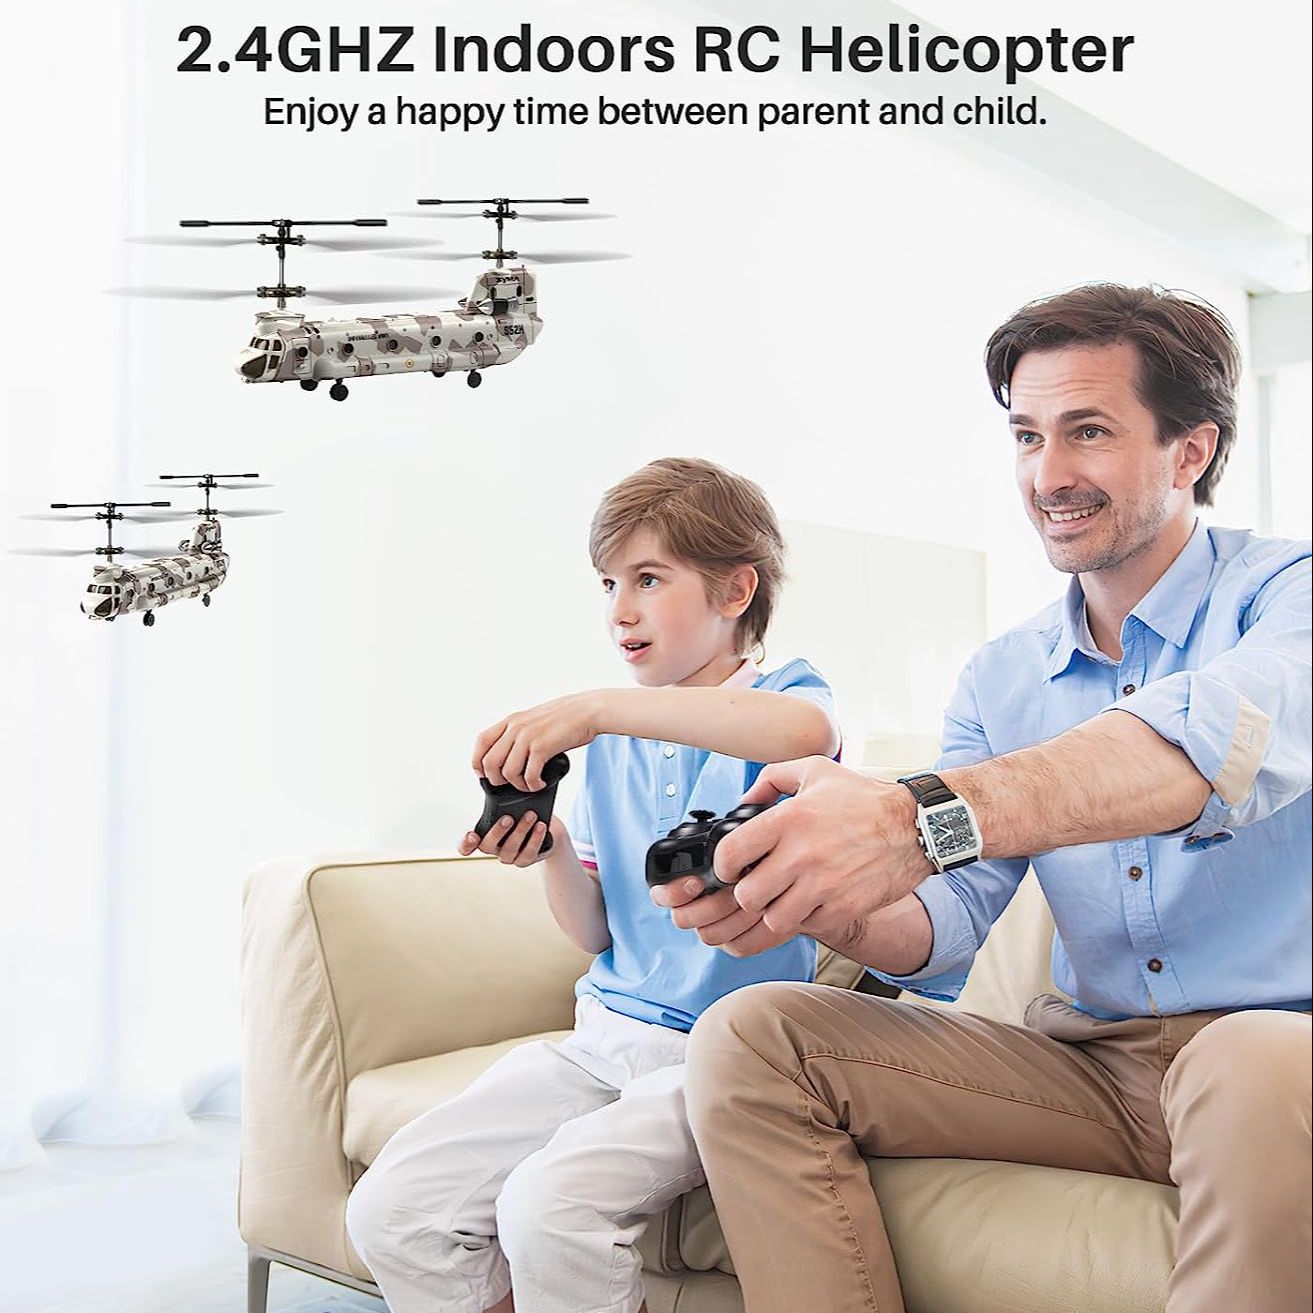 2.4GHZ Indoors RC Helicopter Enjoy a happy time between parent and